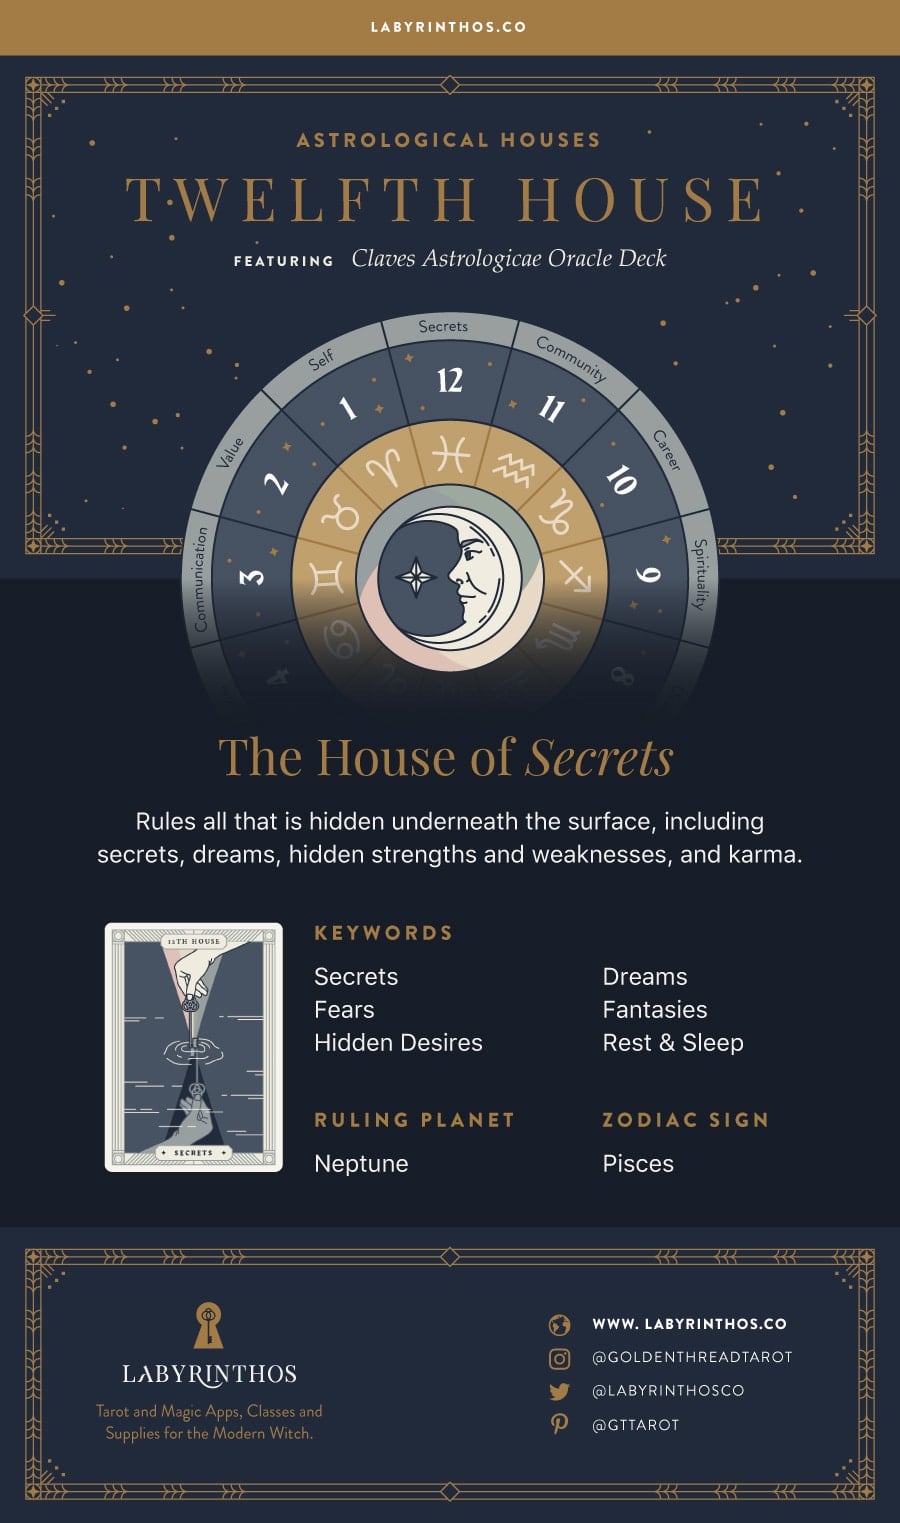 https://cdn.shopify.com/s/files/1/1325/0879/files/12th-twelfth-house-astrology-houses-zodiac-horscope-occult-witchcraft-magick-wiccan-cheat-sheet-25.jpg?v=1597460805